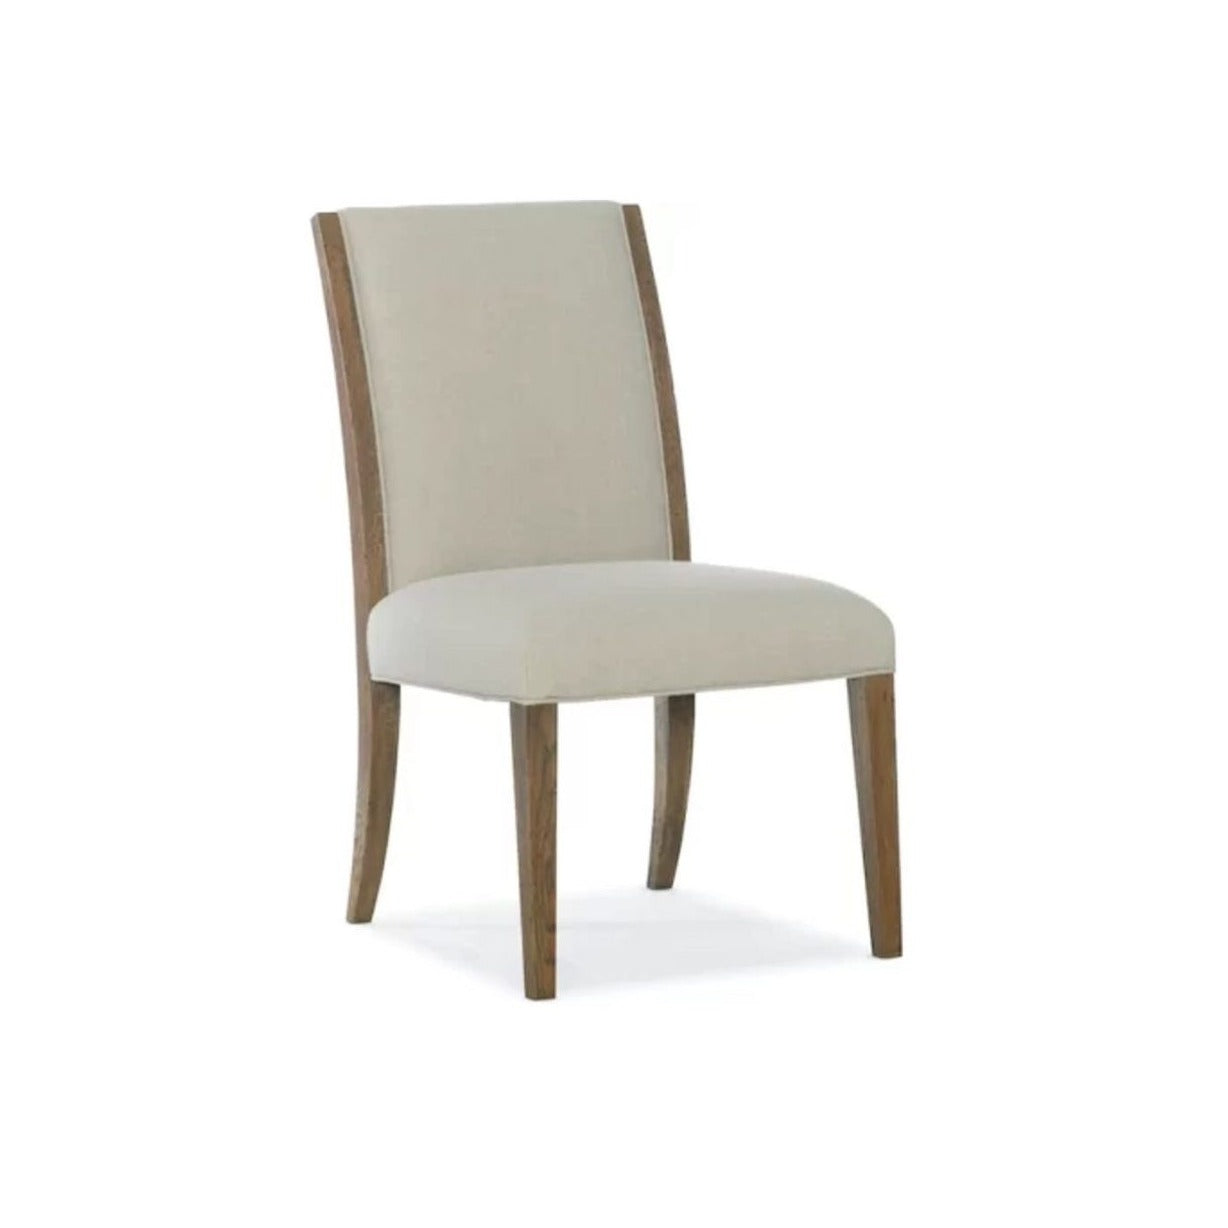 Chapman Upholstered Side Chair - Hedi's Furniture